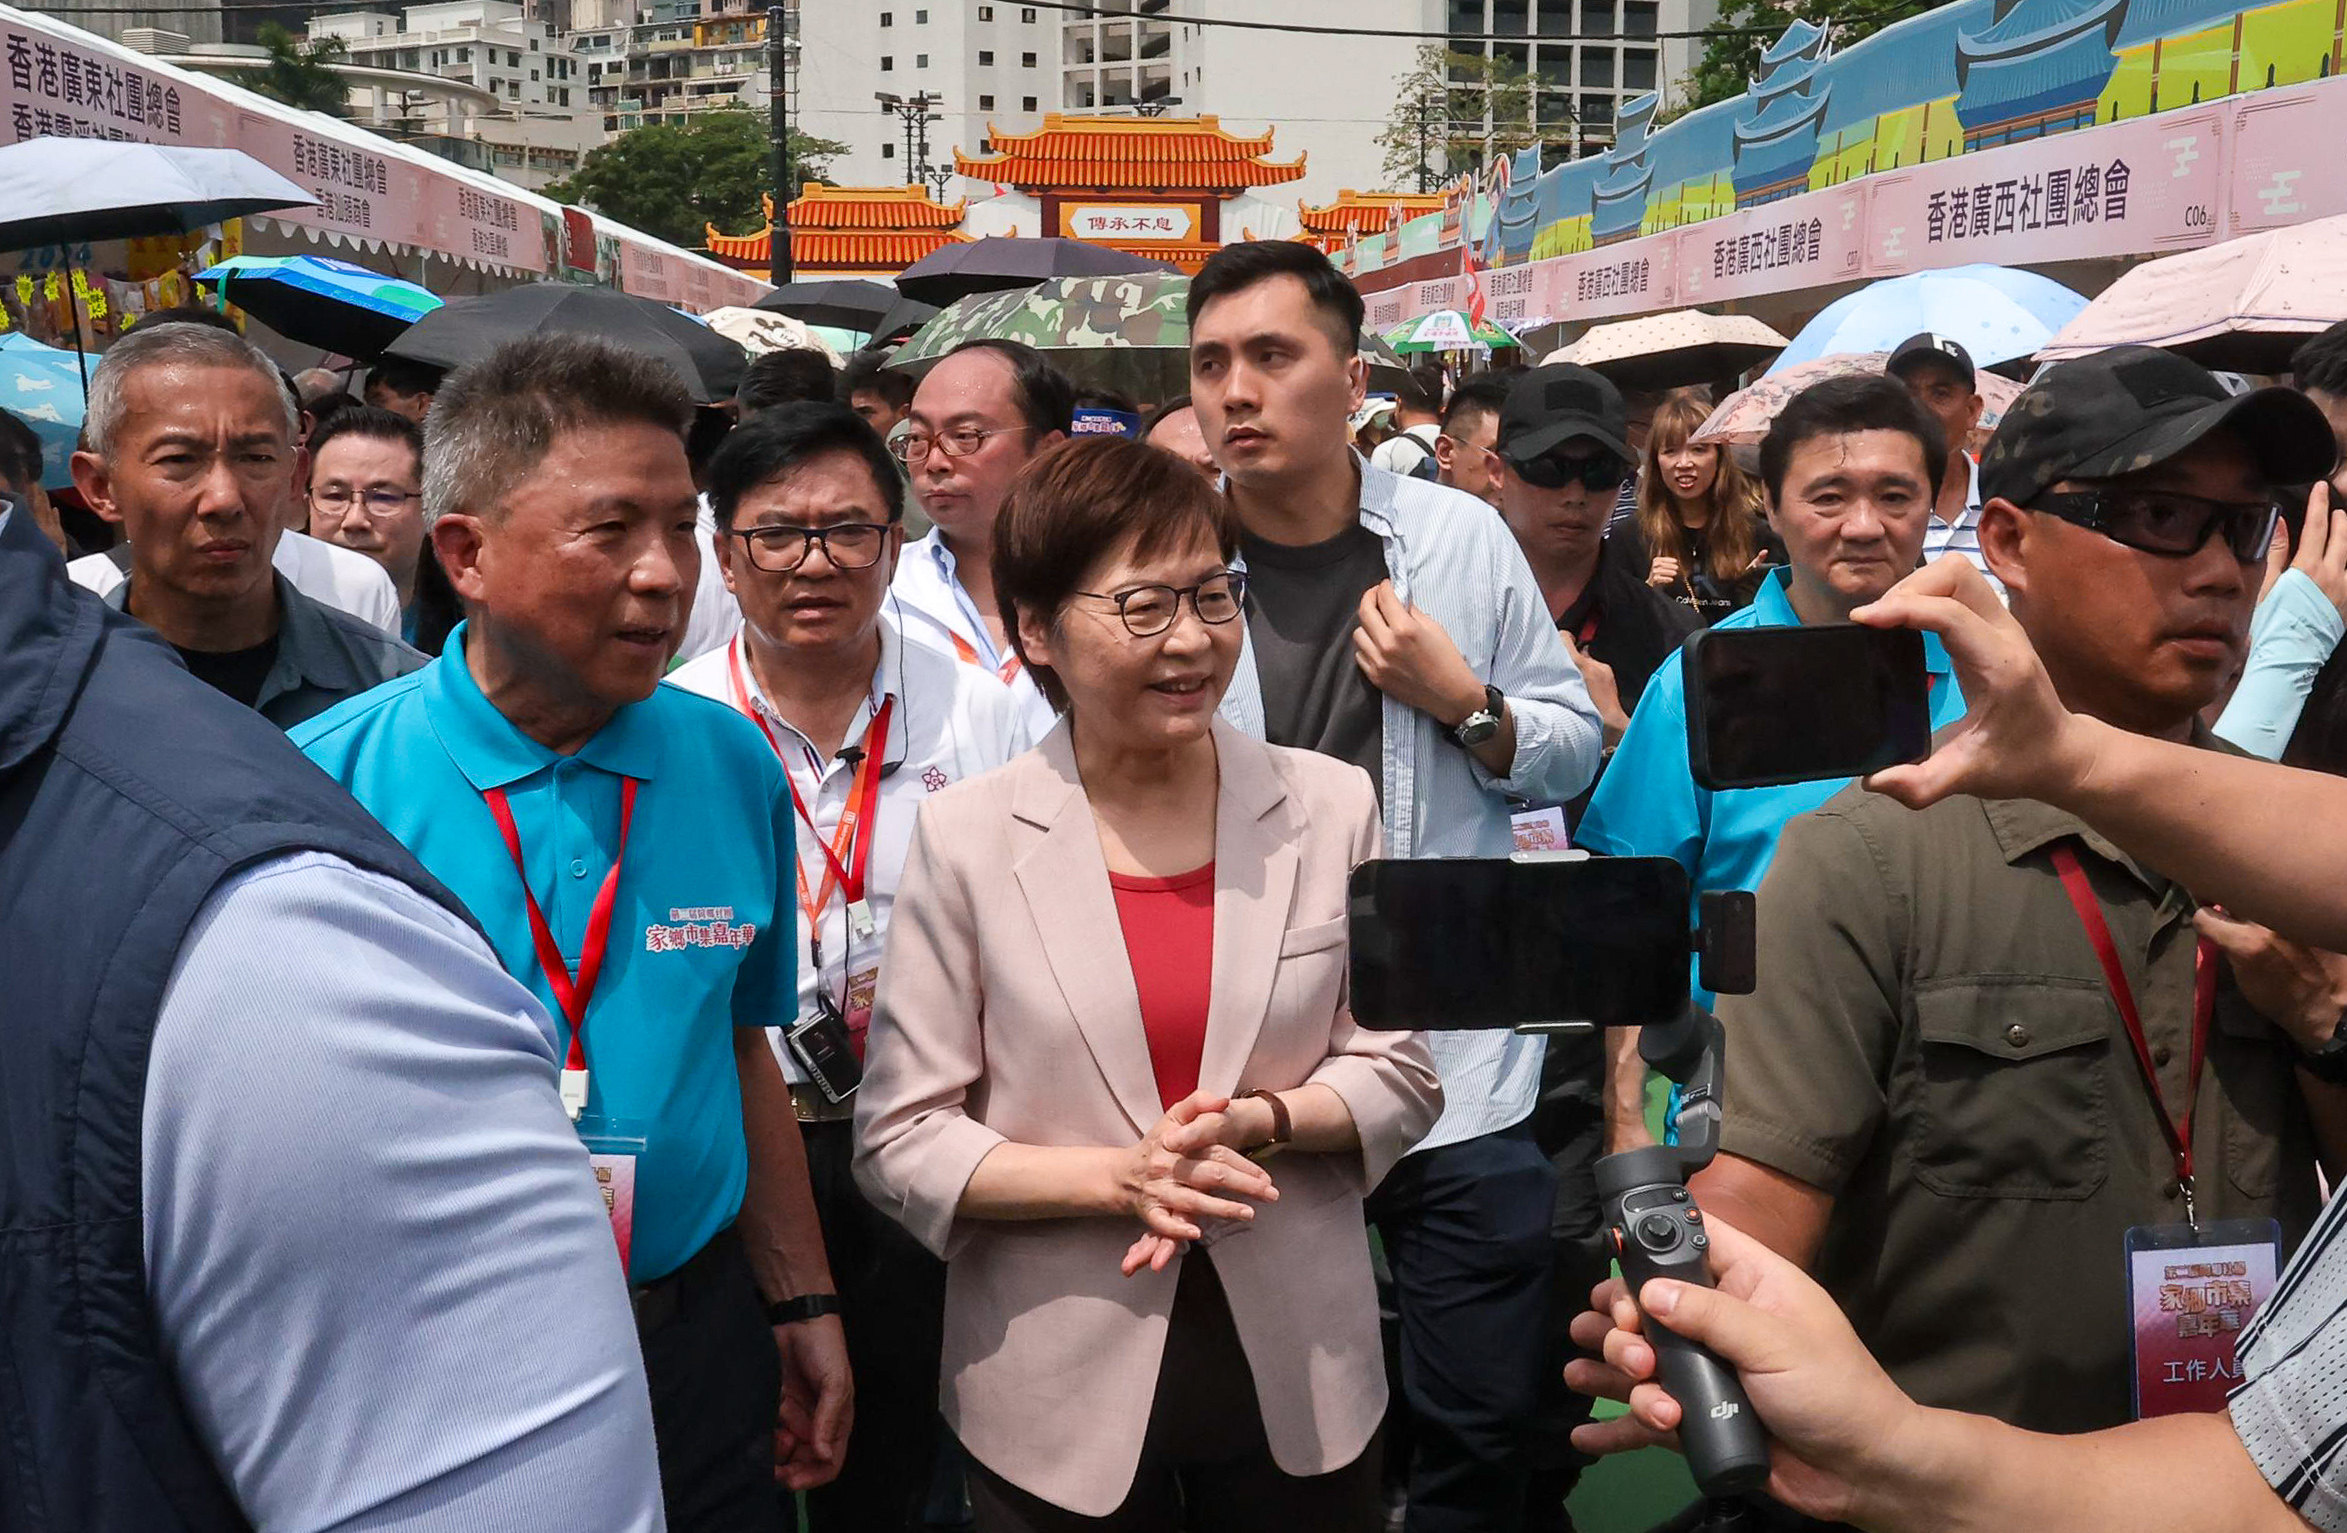 Carrie Lam visits the “‘Hometown market” in Victoria Park on Sunday afternoon. Photo: Jonathan Wong